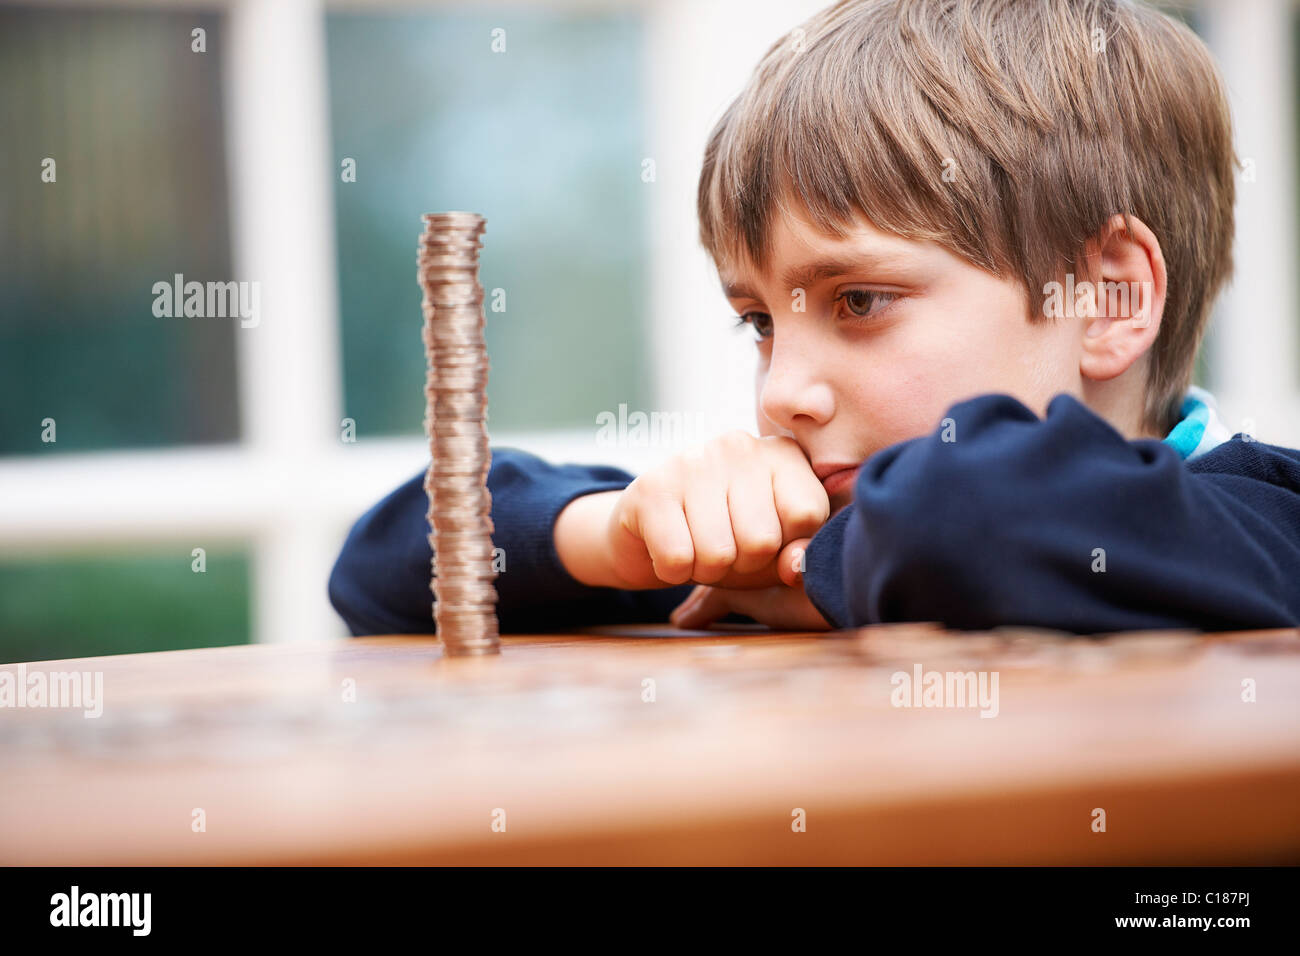 Boy looking at a tower of coins Stock Photo